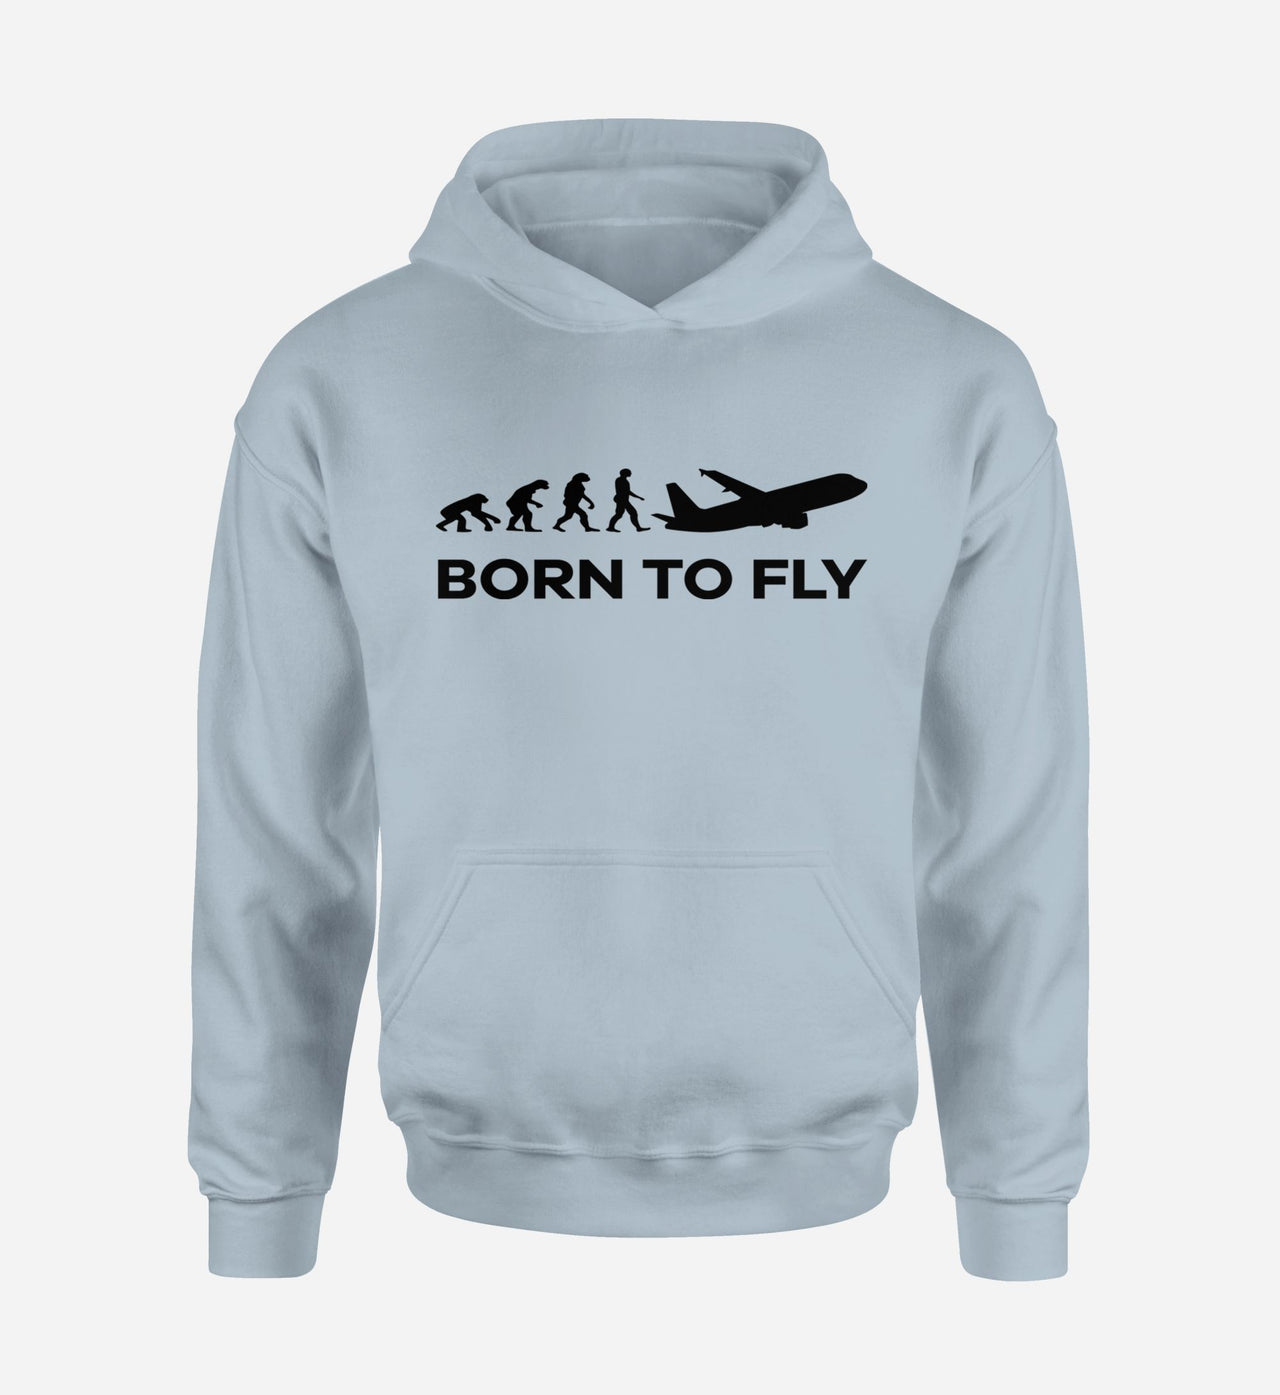 Born To Fly Designed Hoodies